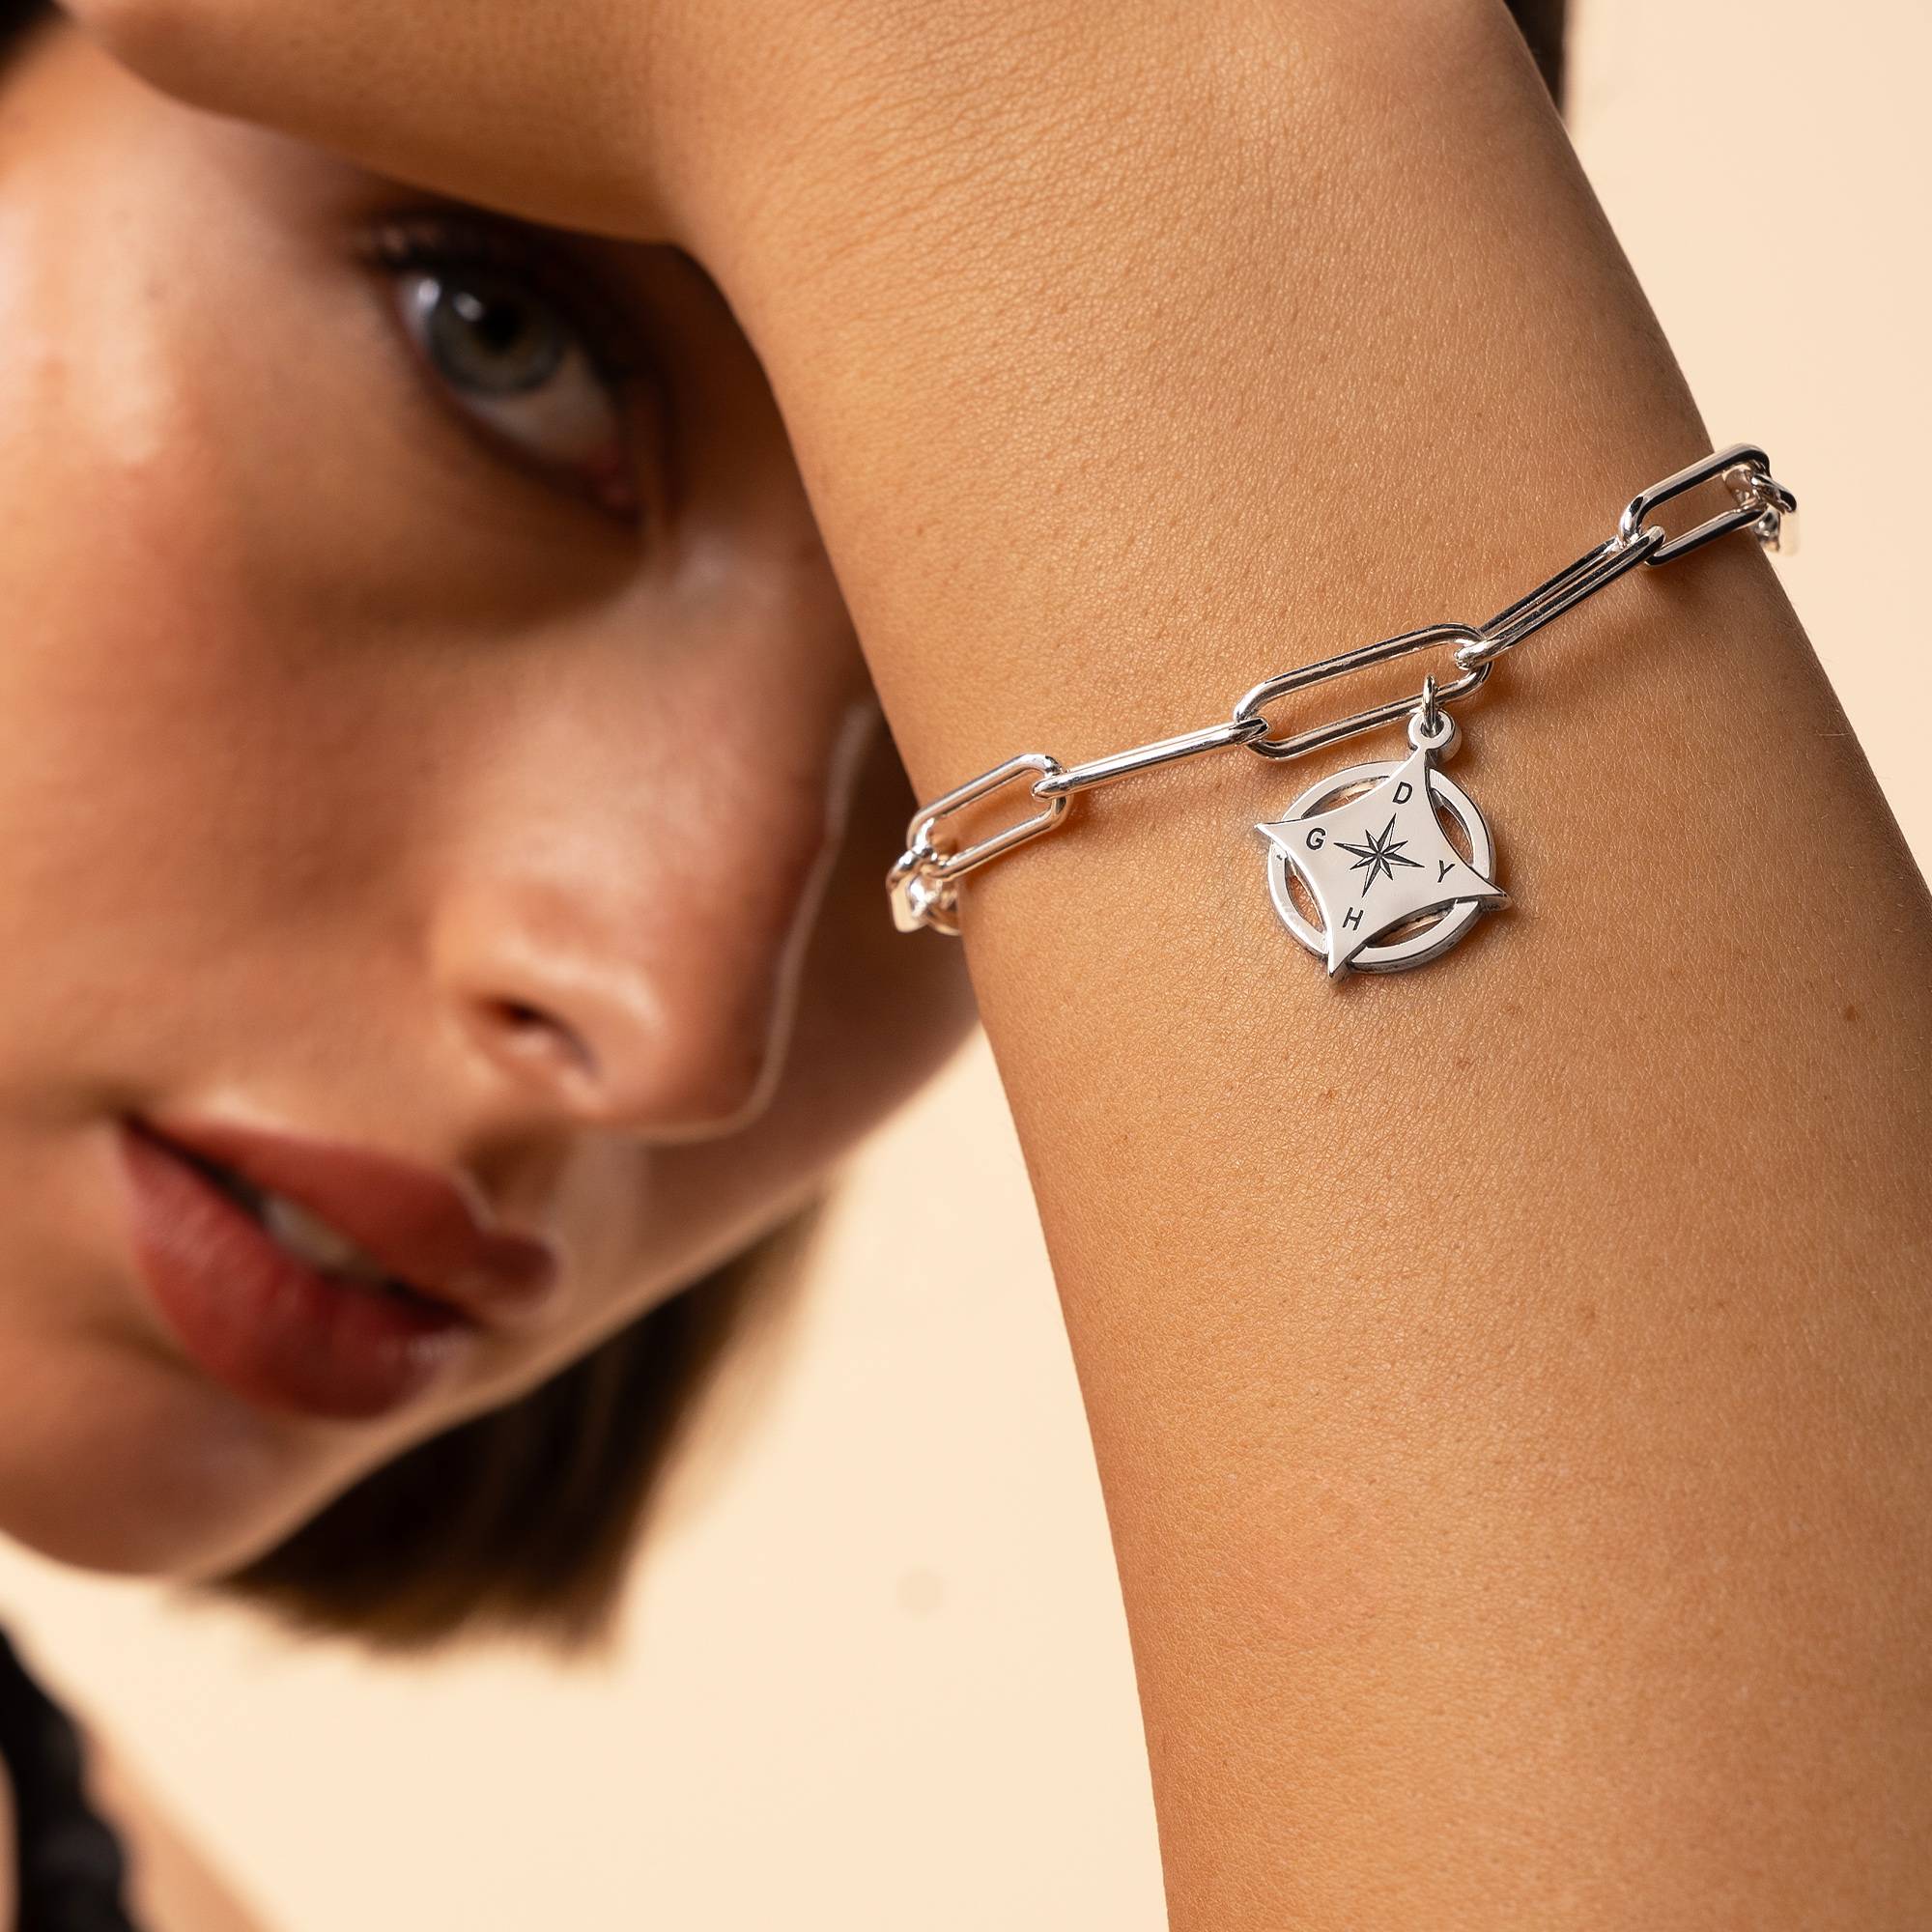 Kaia Initiaal Kompas Armband in Sterling Zilver-3 Productfoto